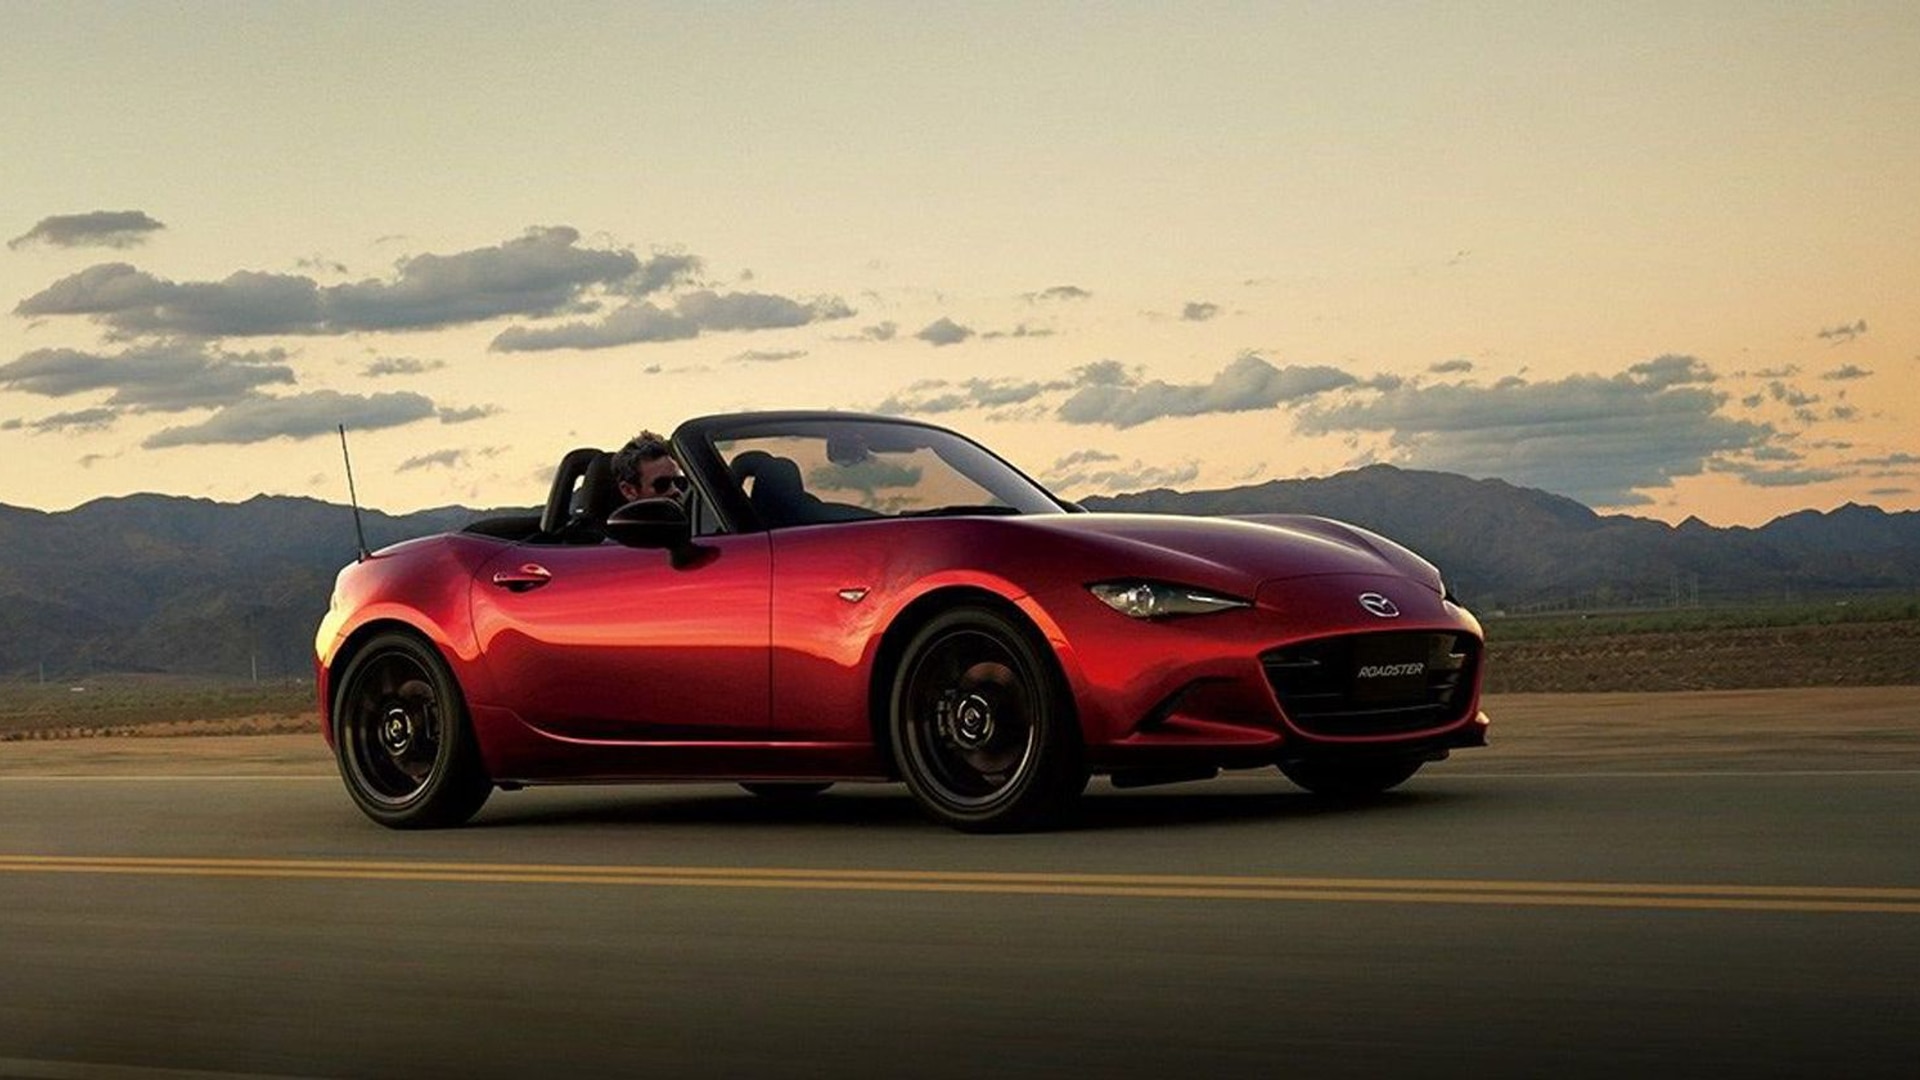 Mazda reveals updated MX5 Miata with more power, features